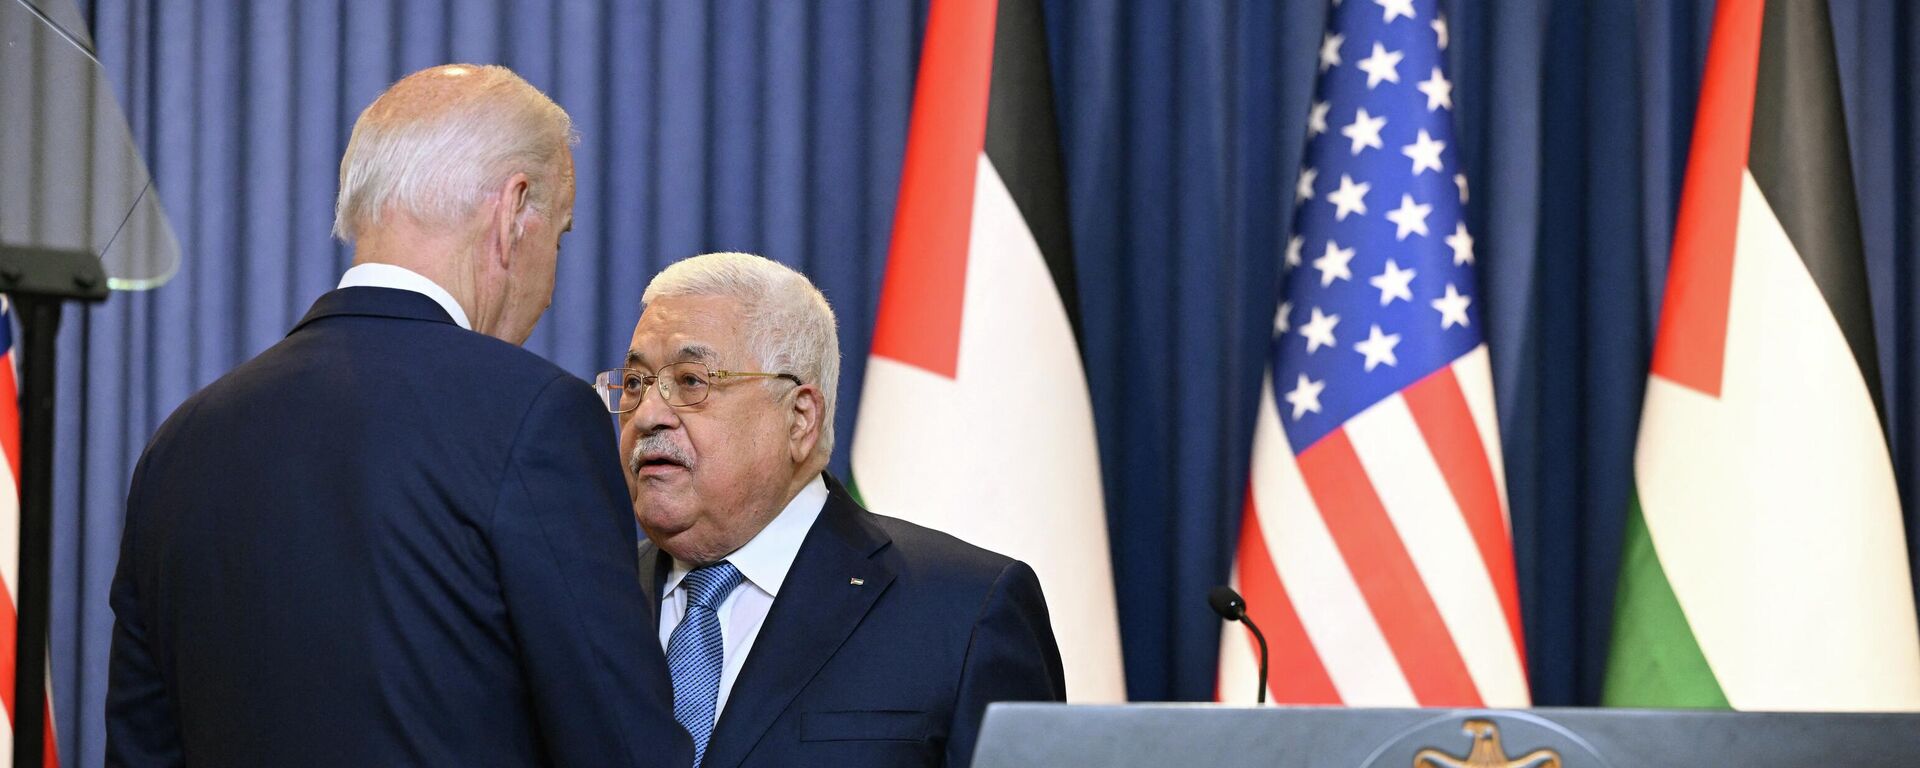 US President Joe Biden and Palestinian president Mahmud Abbas speak together after their statements to the media at the Muqataa Presidential Compound in the city of Bethlehem in the occupied West Bank on July 15, 2022 - Sputnik International, 1920, 17.07.2022